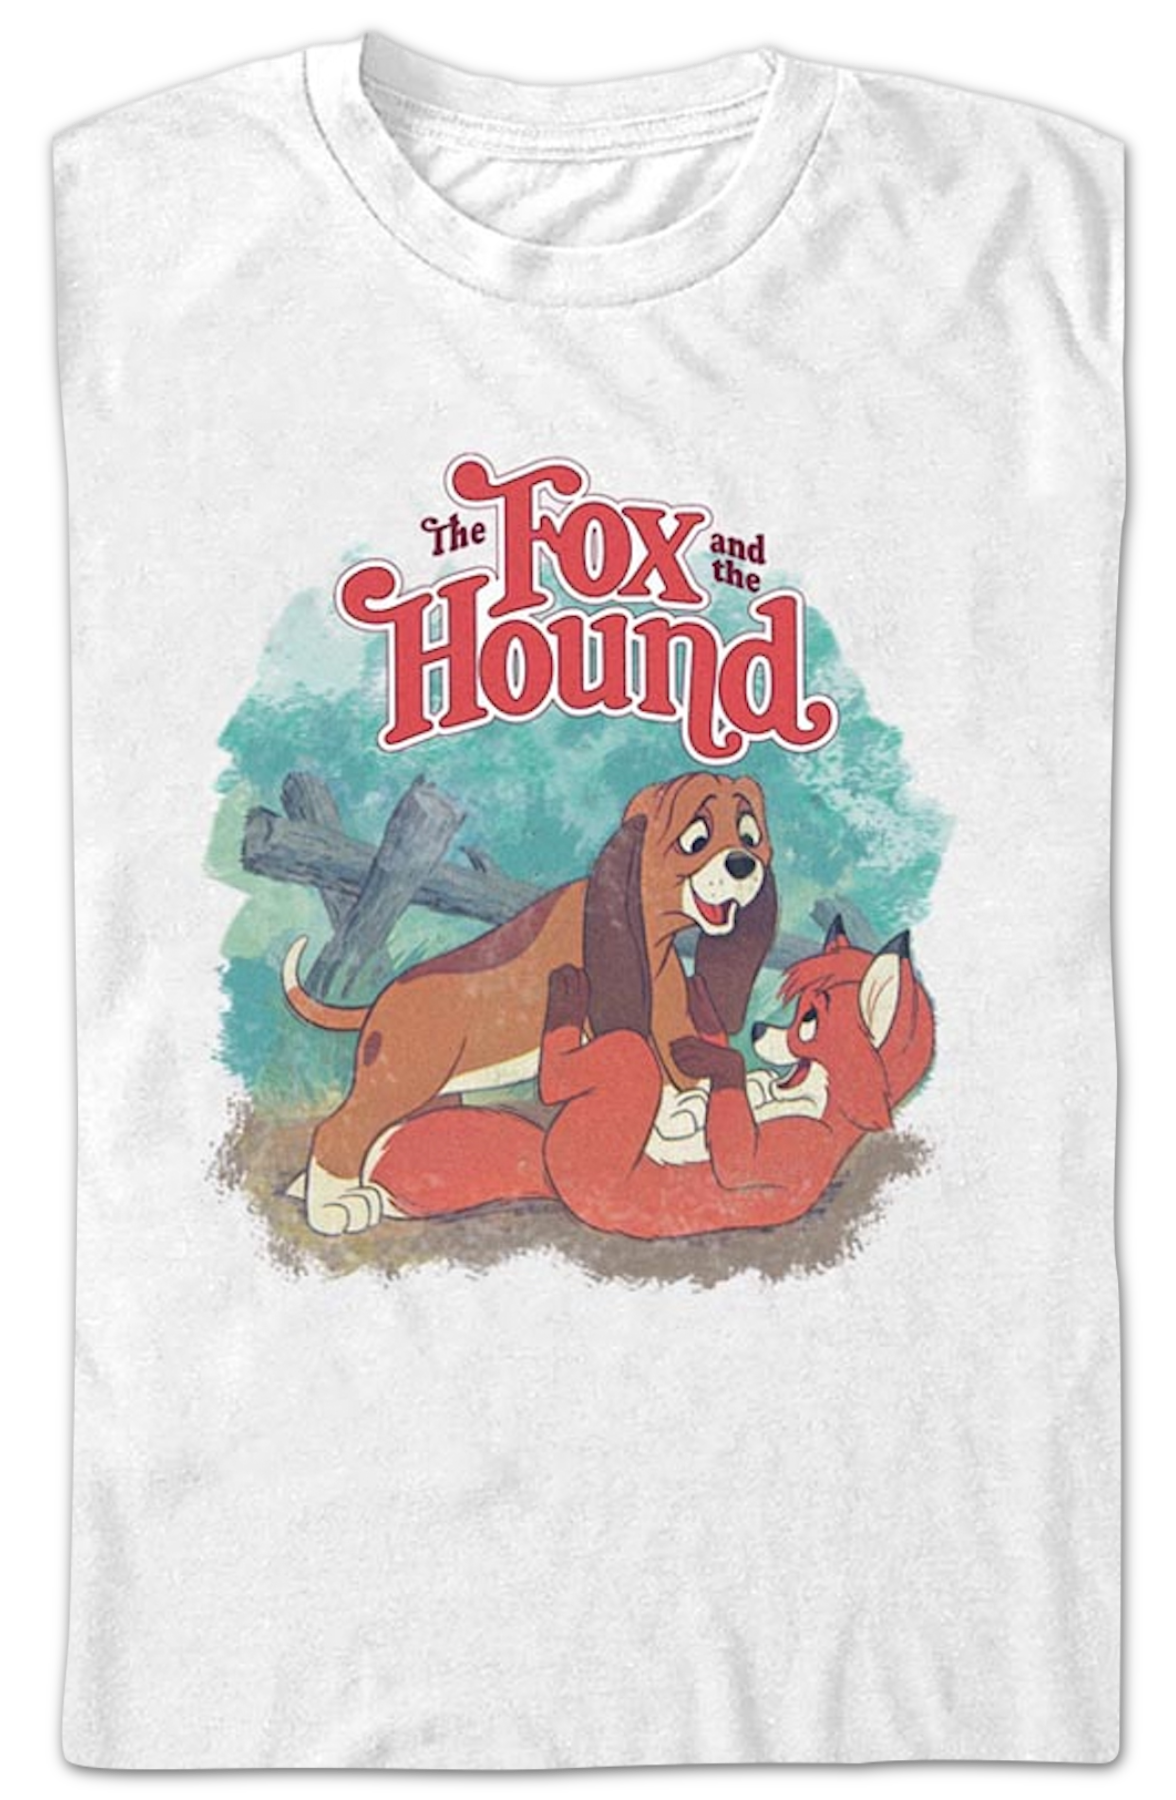 The Fox and the Hound Disney T-Shirt